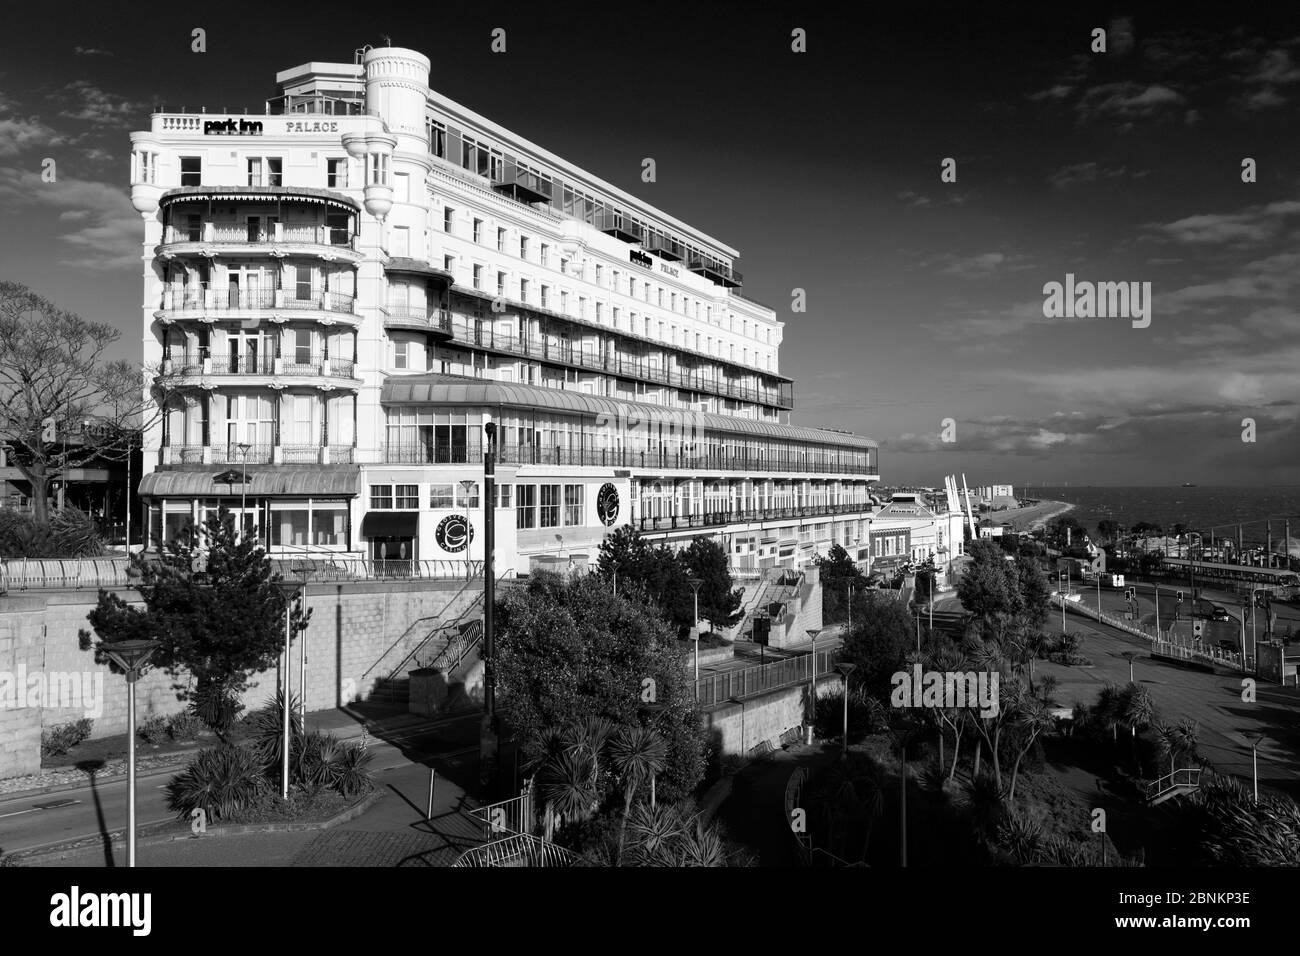 The Palace Hotel, Royal Terrace, Southend-on-Sea town, Thames Estuary, Essex, County, England, UK Stock Photo